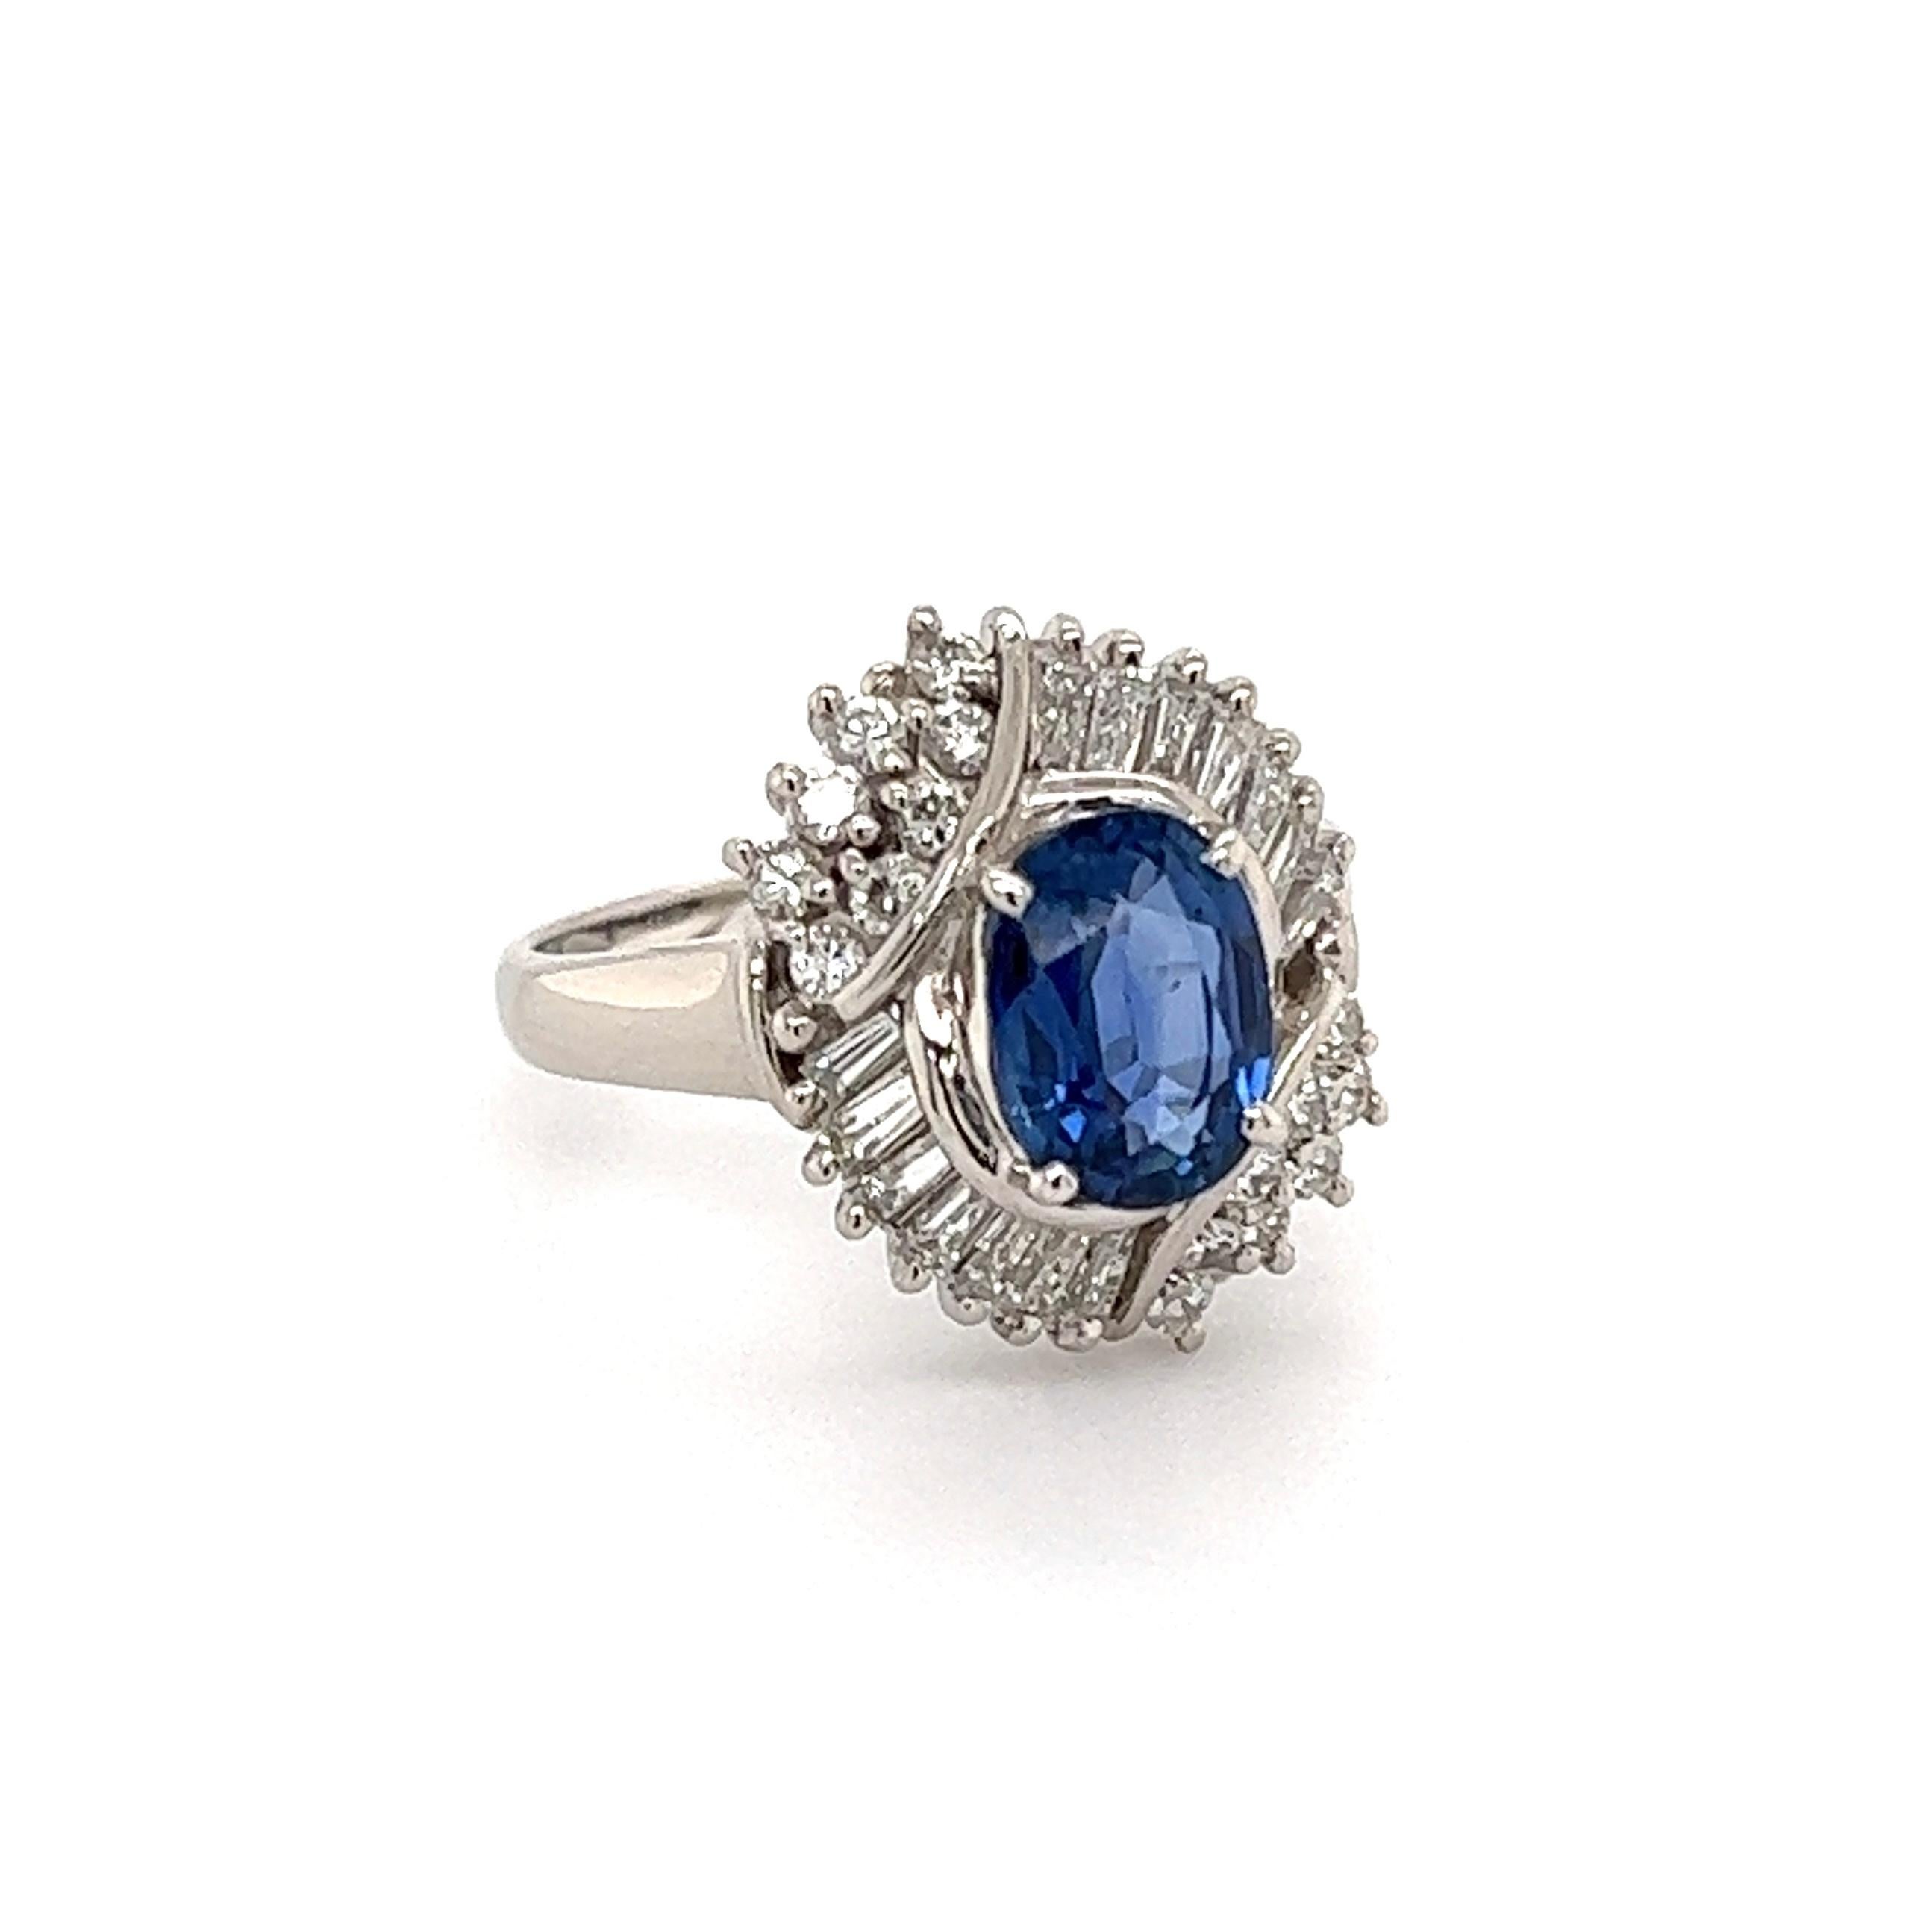 Simply Beautiful! Finely detailed Platinum Sapphire and Diamond Ring. Center securely nestled with a NO HEAT oval Australian Blue Sapphire, weighing approx. 1.92 Carats surrounded by Diamonds, weighing approx. 0.72tcw. Hand crafted in Platinum. GIA